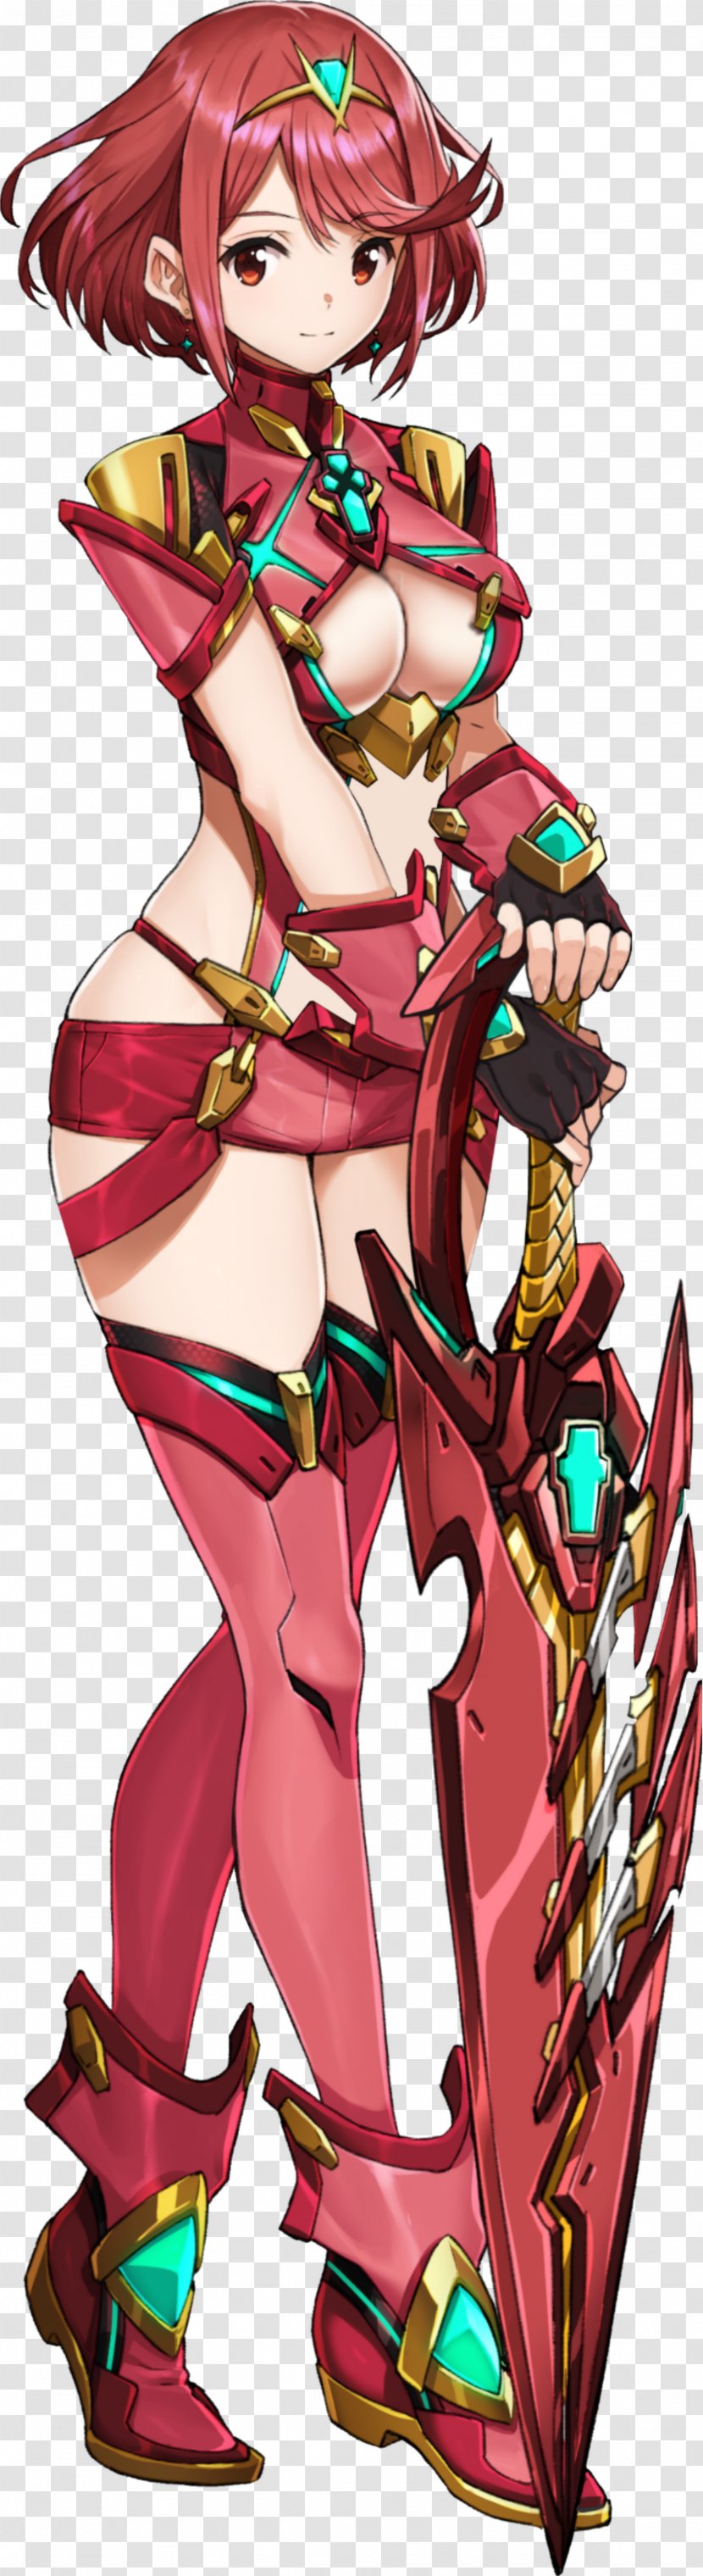 Xenoblade Chronicles 2 Wii Nintendo Switch - Frame Transparent PNG